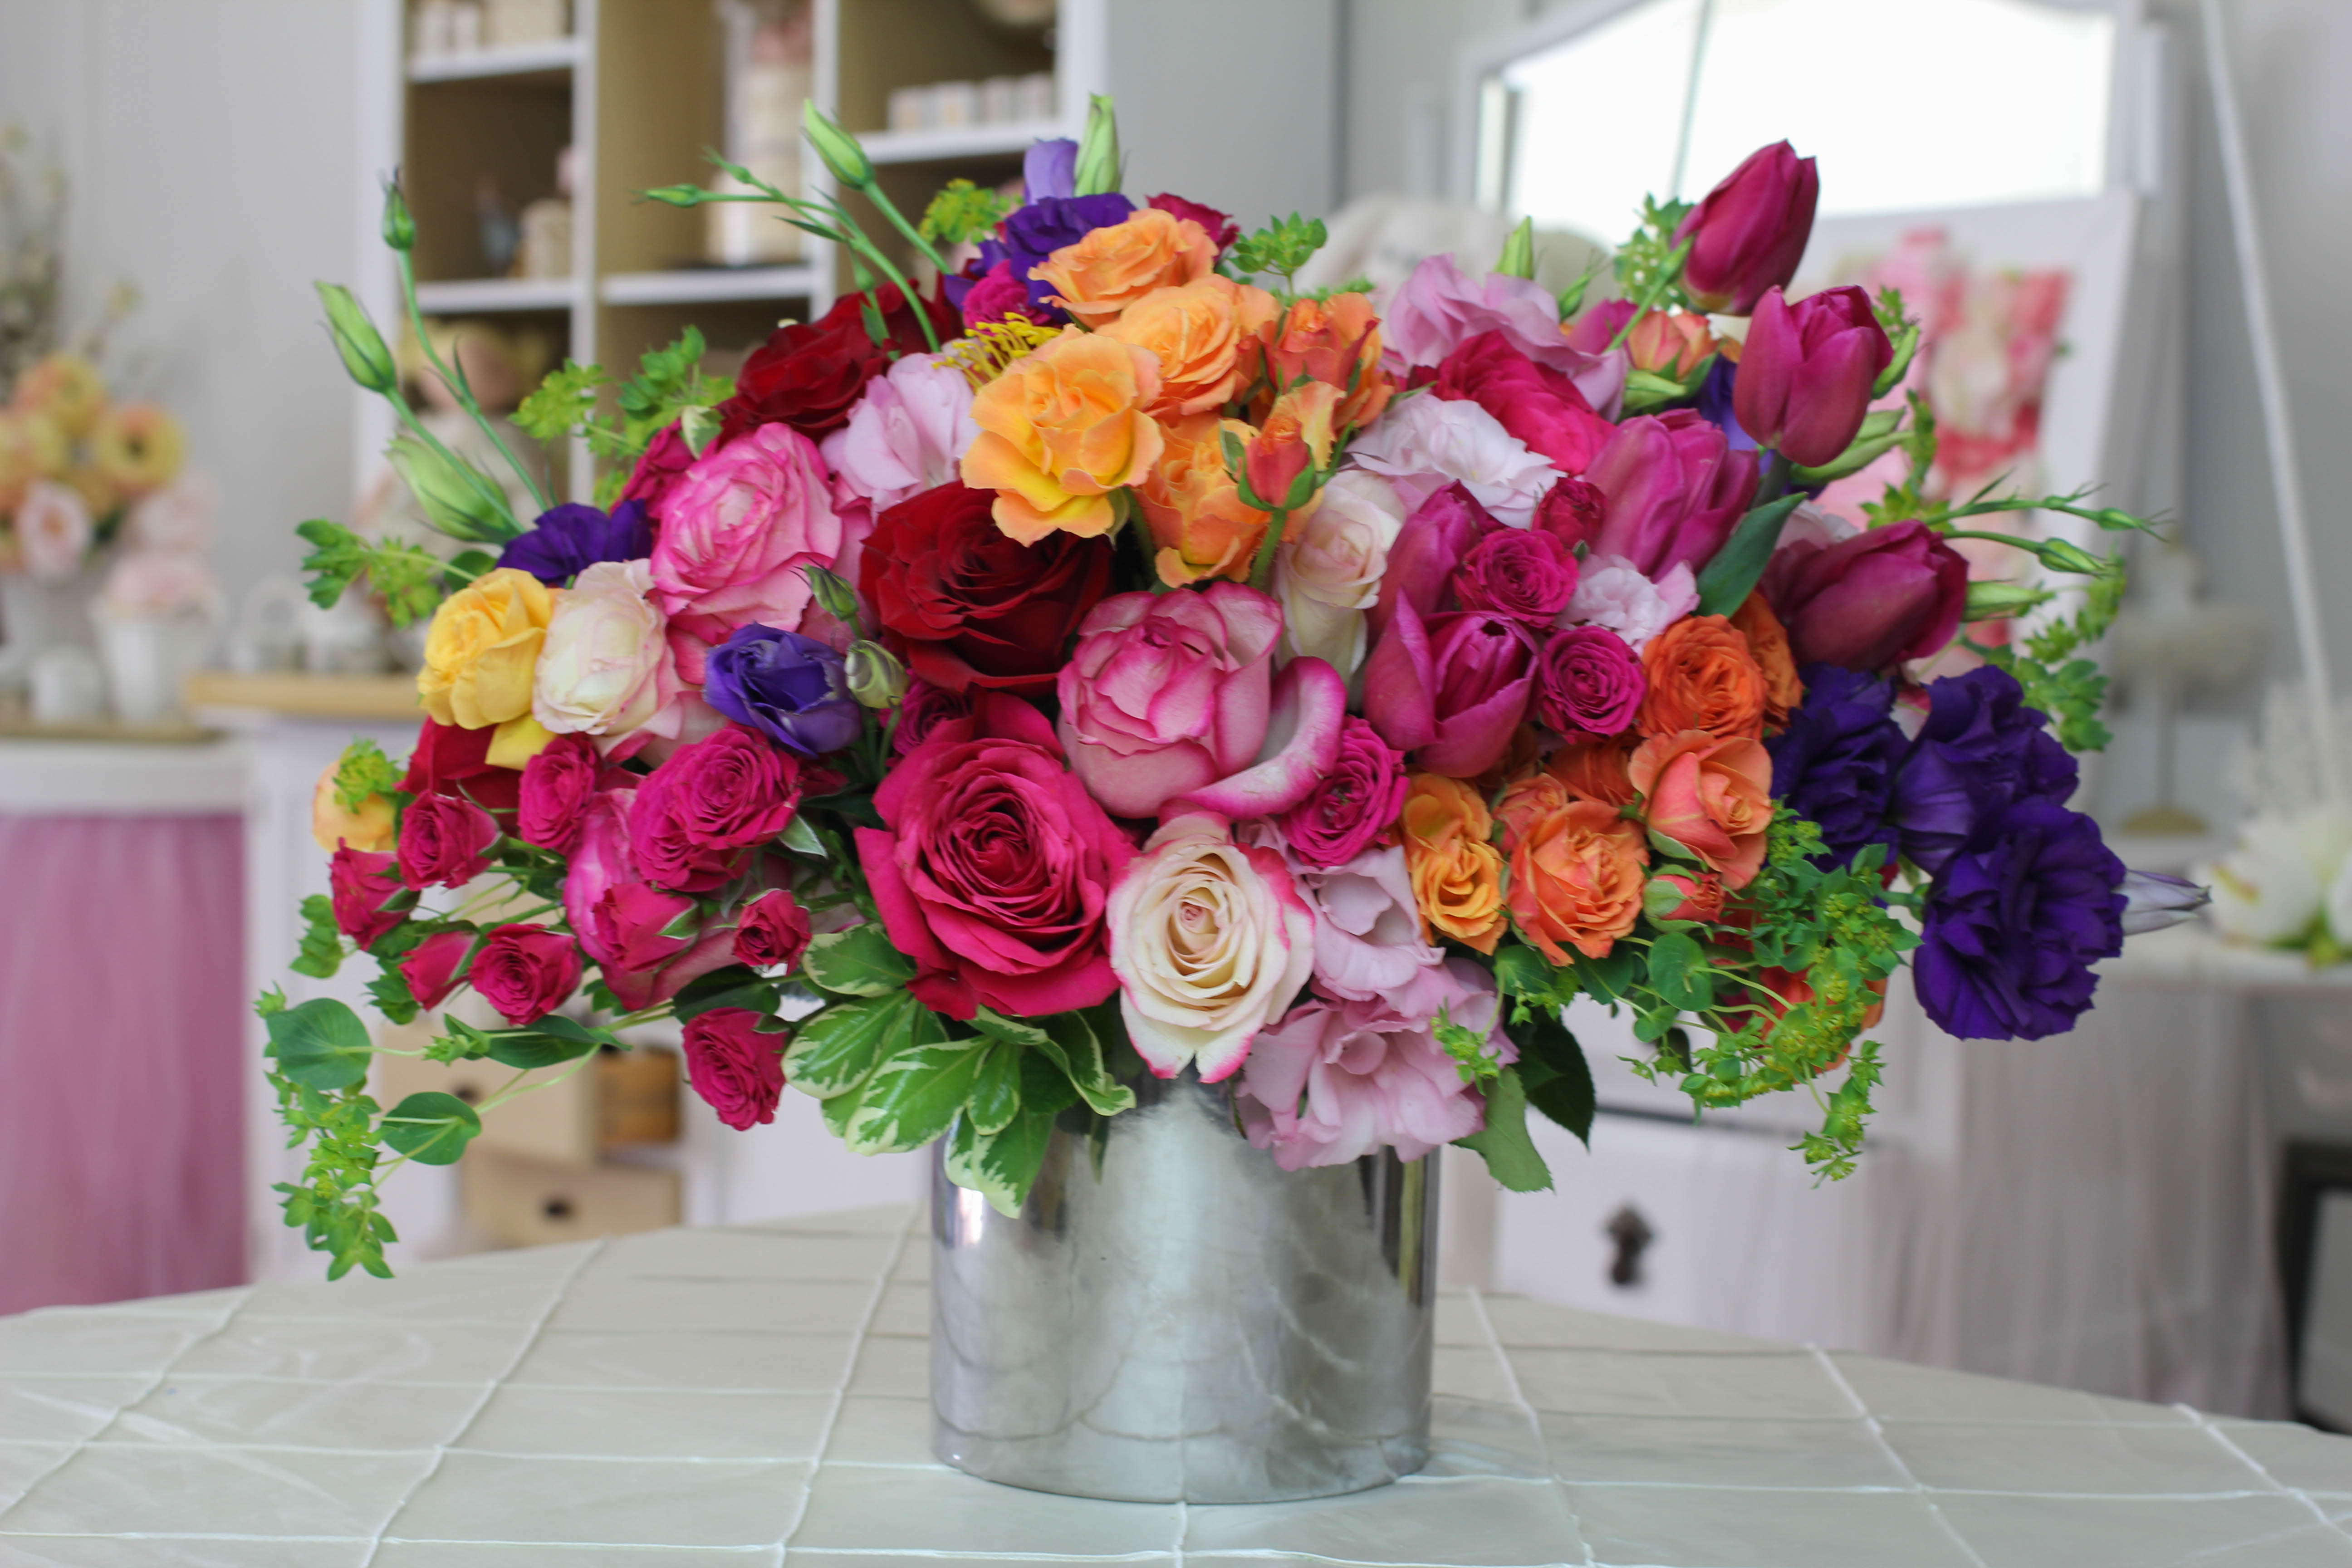 Endless colors - Mix of vibrant fun colors! Fresh blooms are hand crafted to perfection with this spring inspiring quality bouquet. our florist uses the freshest combination of roses, hydrangeas and tulips with gorgeous greenery to give this arrangement life. It is the perfect sentiment for any occasion and it is sure to brighten someone's day.